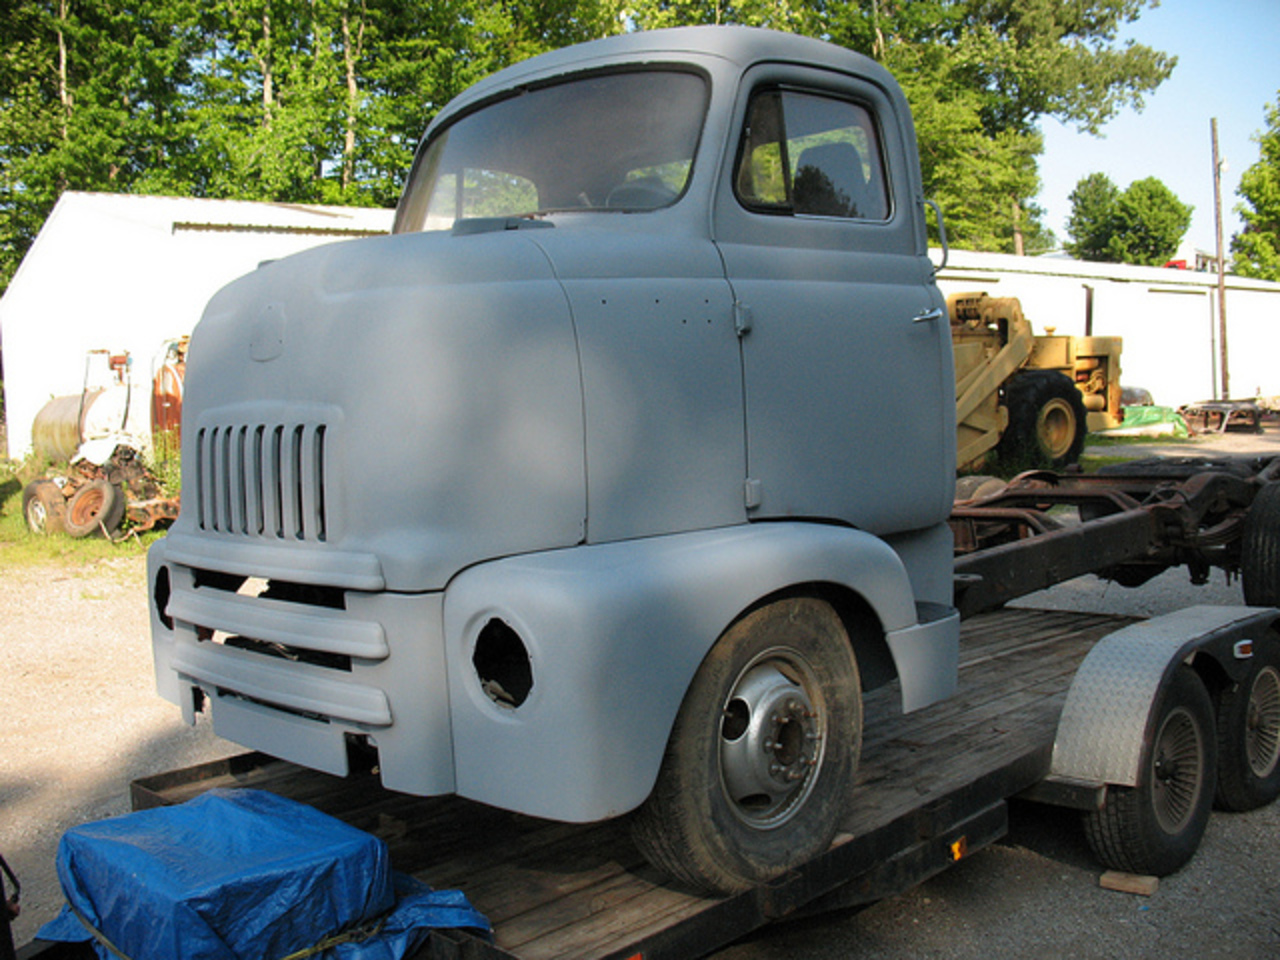 FOR SALE: 1952 International L-160 Series COE | Flickr - Photo ...